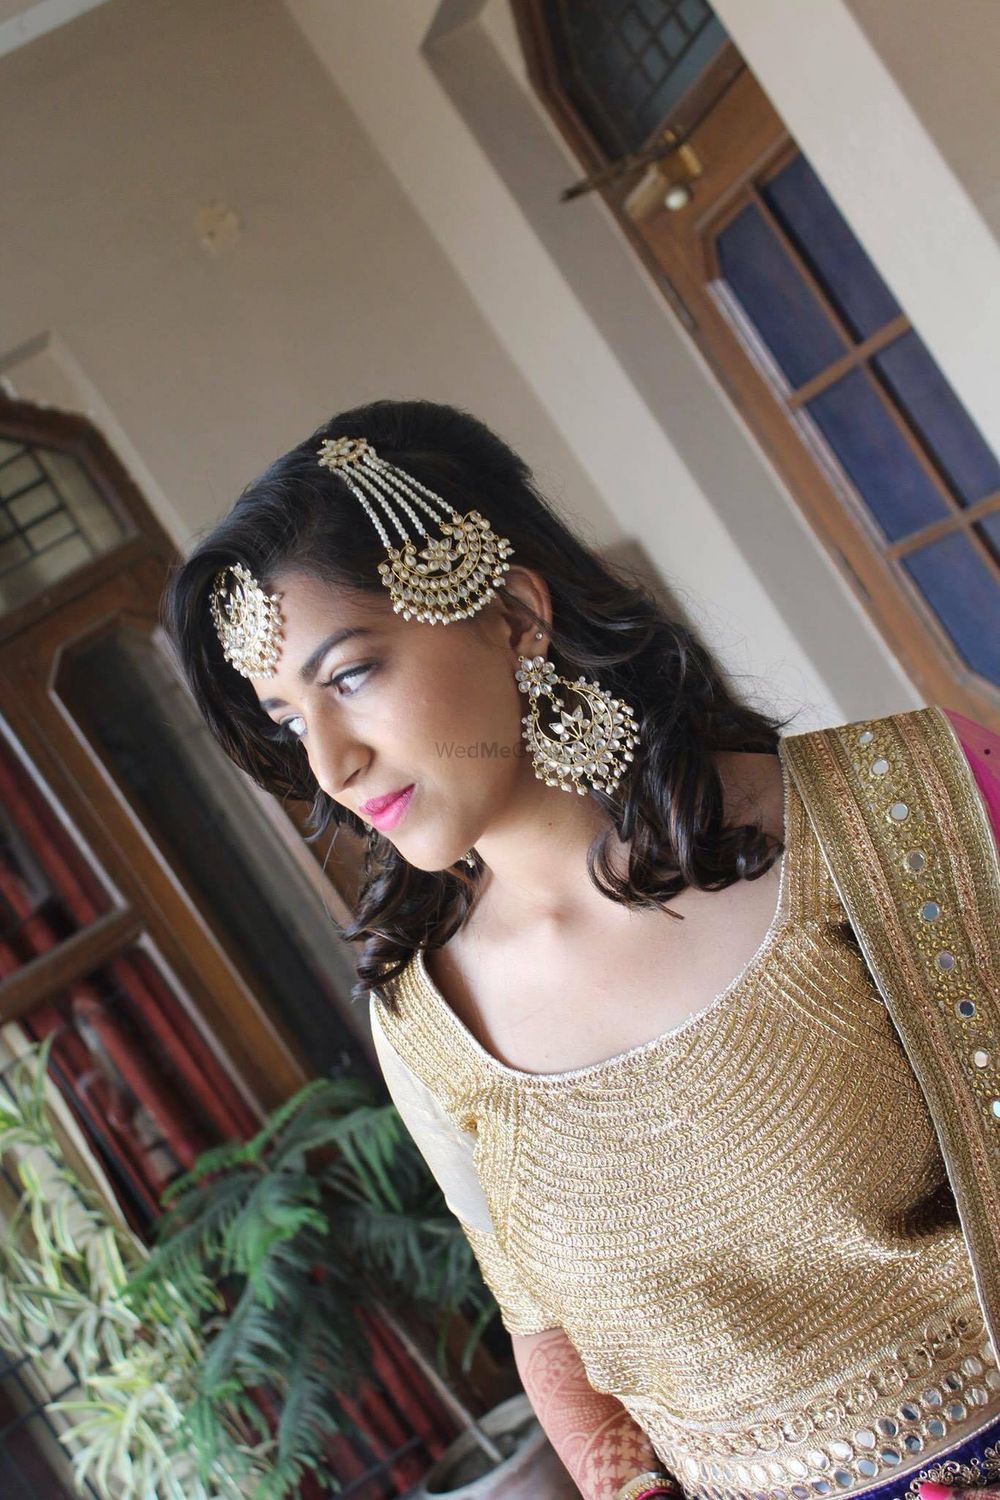 Photo From Free Different Party Looks - By Ruchi Makeup Artist